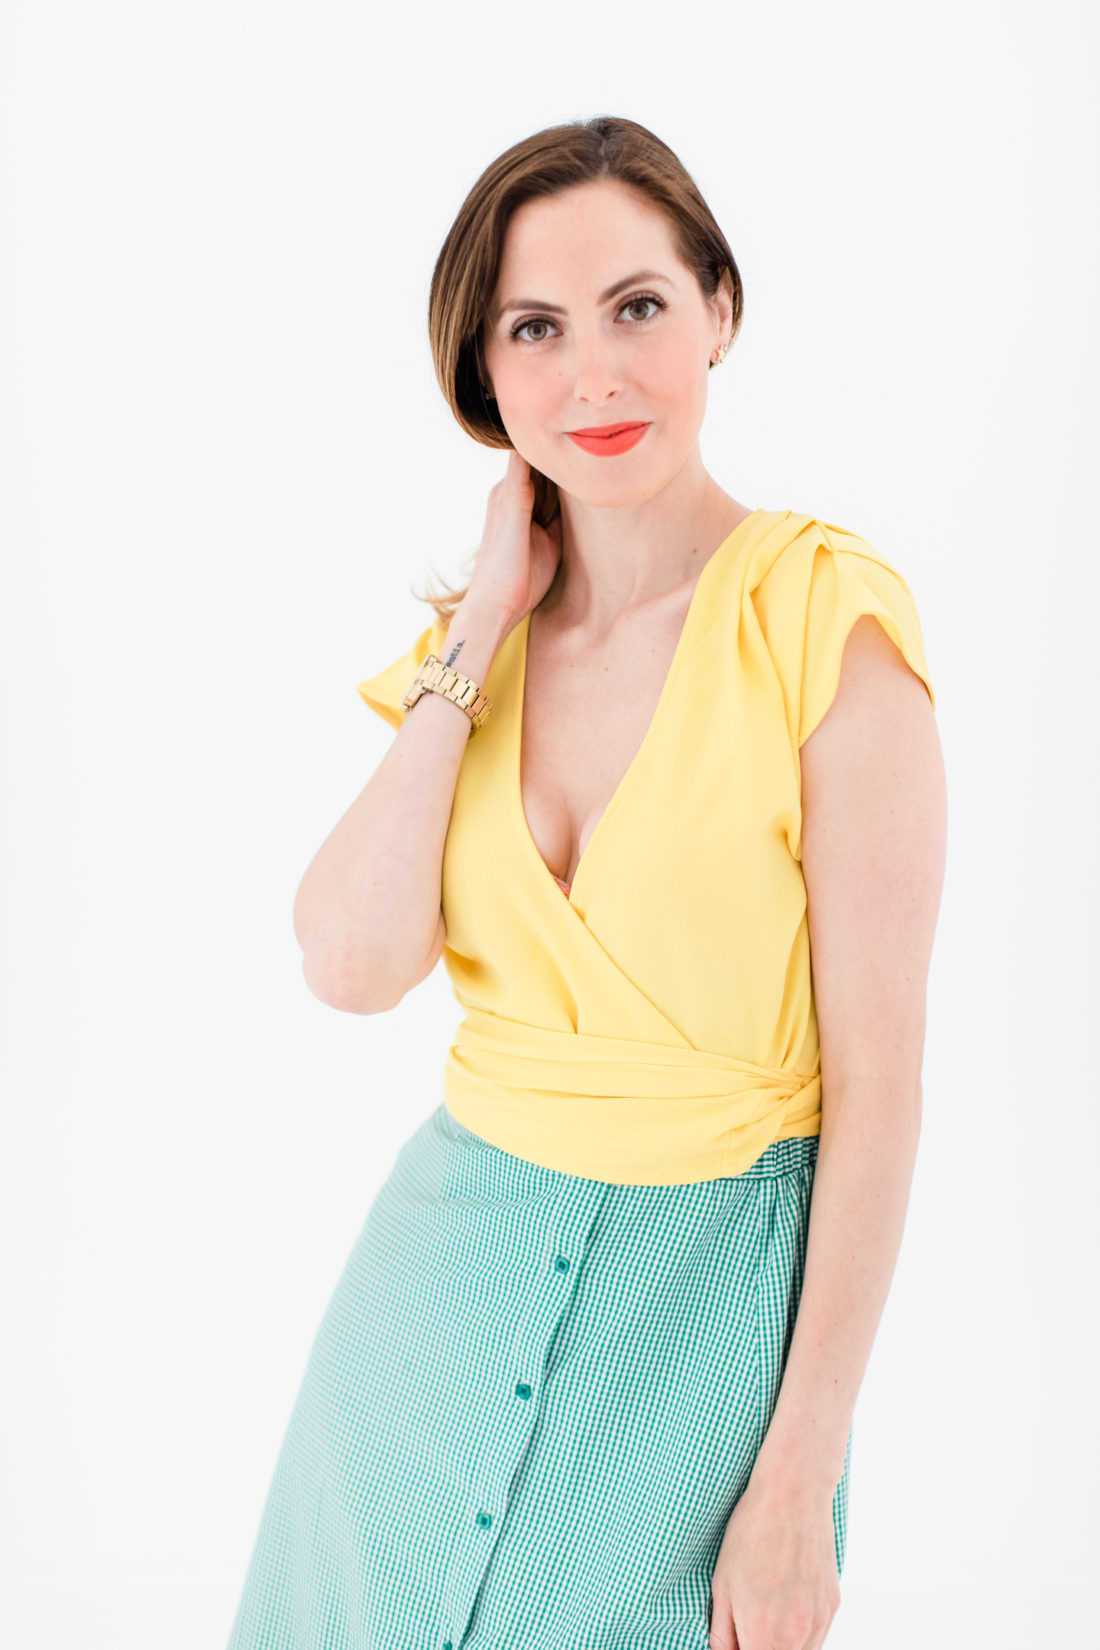 Eva Amurri Martino wears a bright yellow wrap top and gingham ruffle skirt as part of a post about packing for a trip